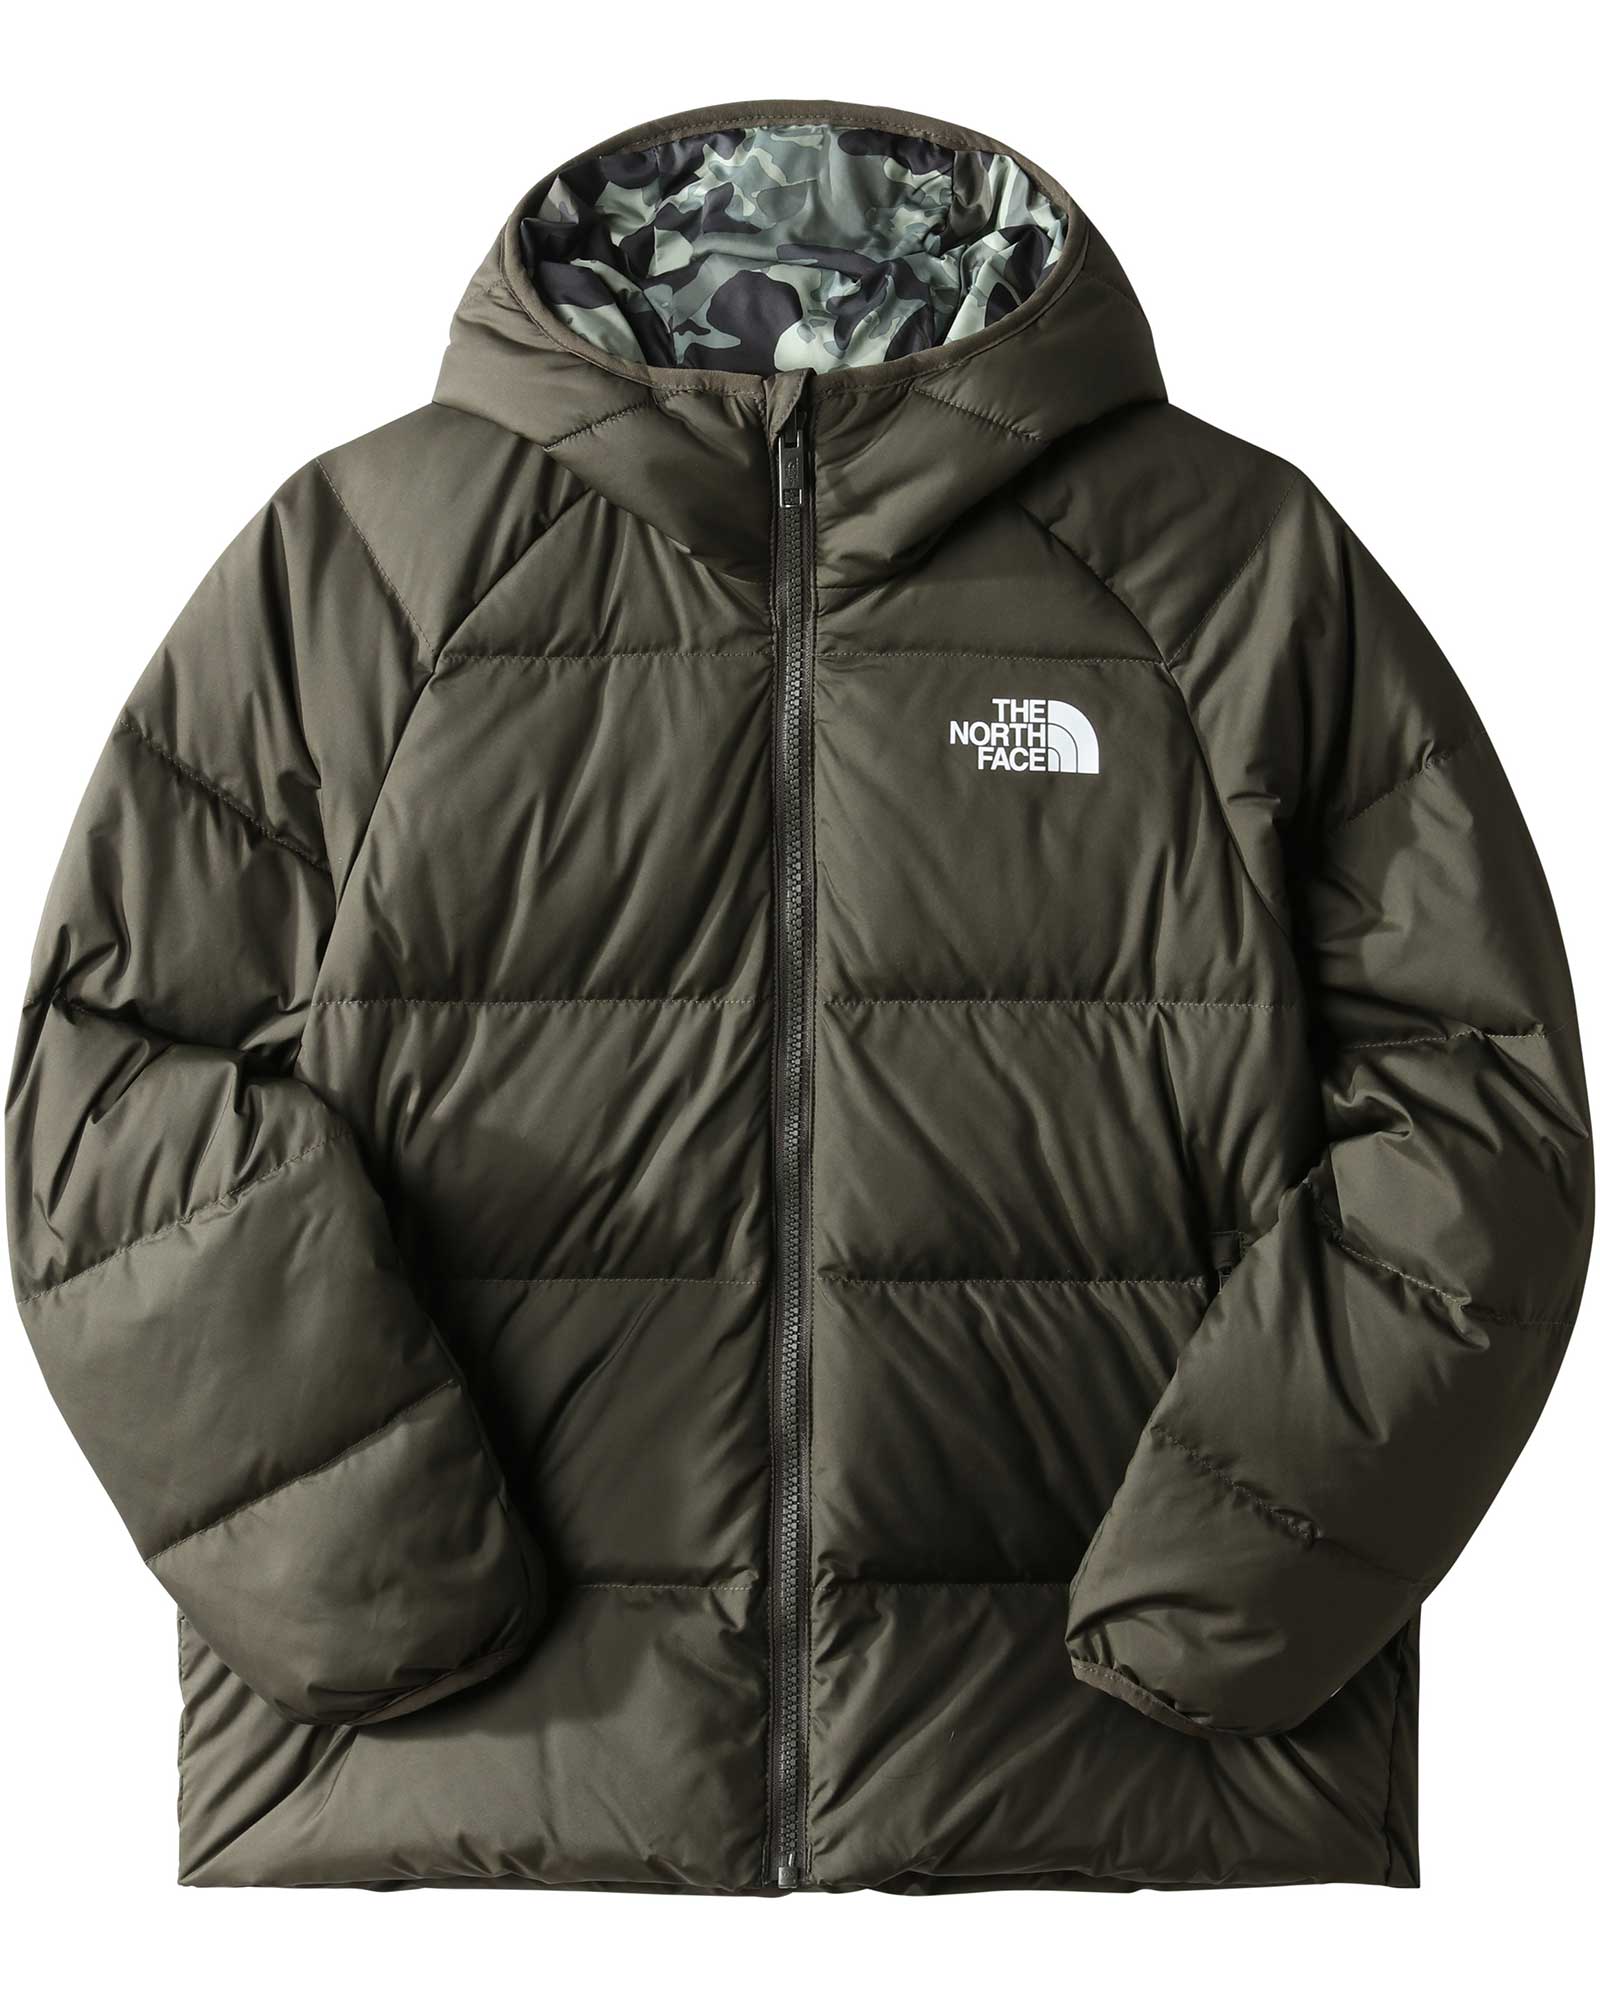 The North Face Print North Kids’ Down Hooded Jacket - New Taupe Green L